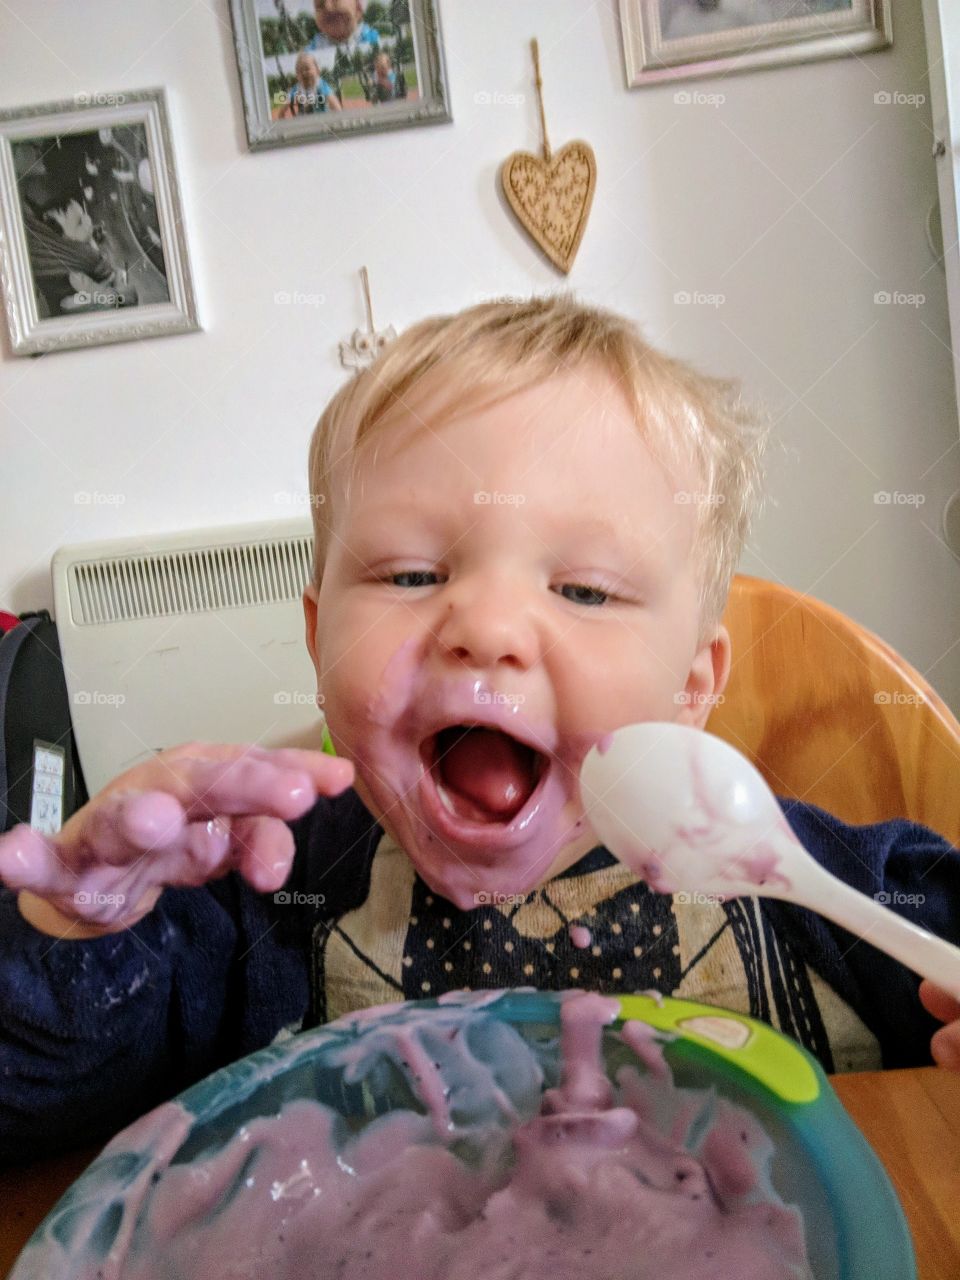 just because you can't eat dairy doesn't mean you have to miss out! my son LOVE alpro plant based yogart. the expression on his face needs no more description